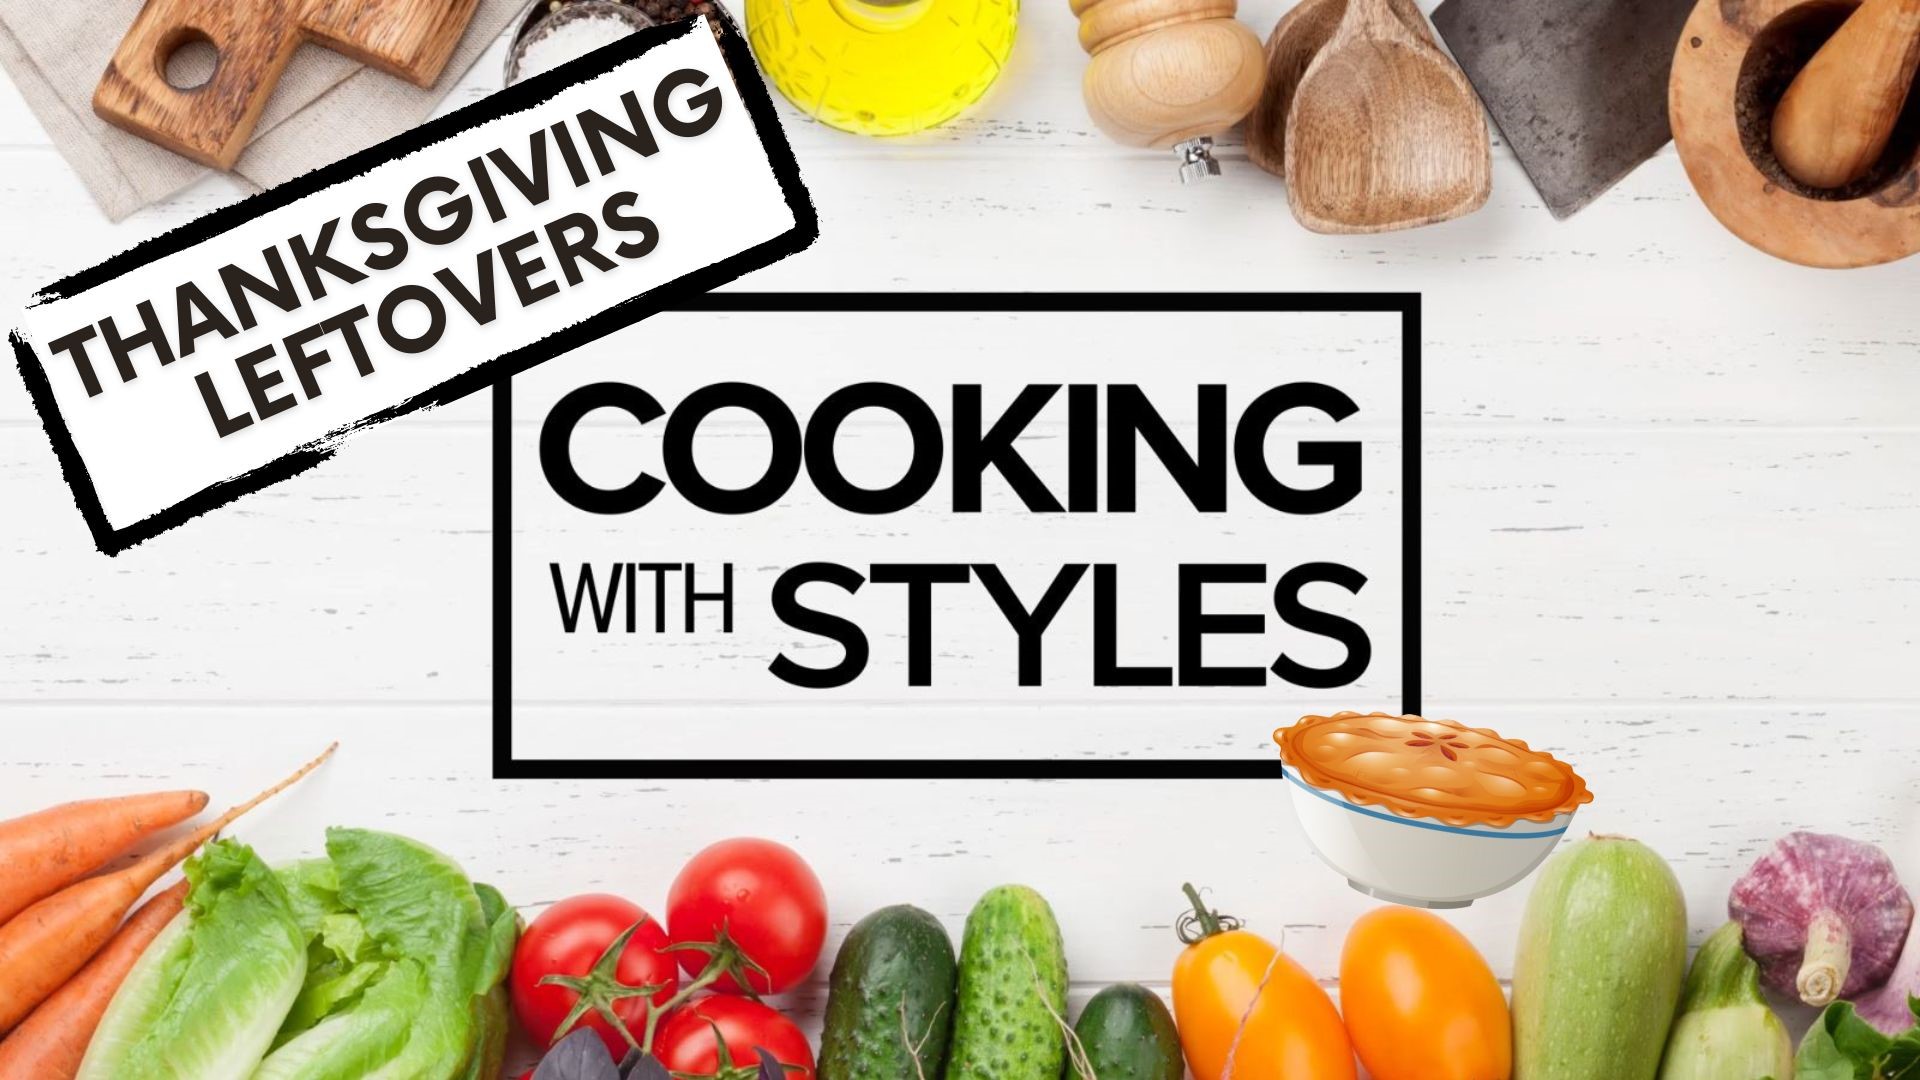 KFMB's Shawn Styles shows us how to get creative with Thanksgiving leftovers, from making Turkey pies to a sandwich platter all will want to join in on.